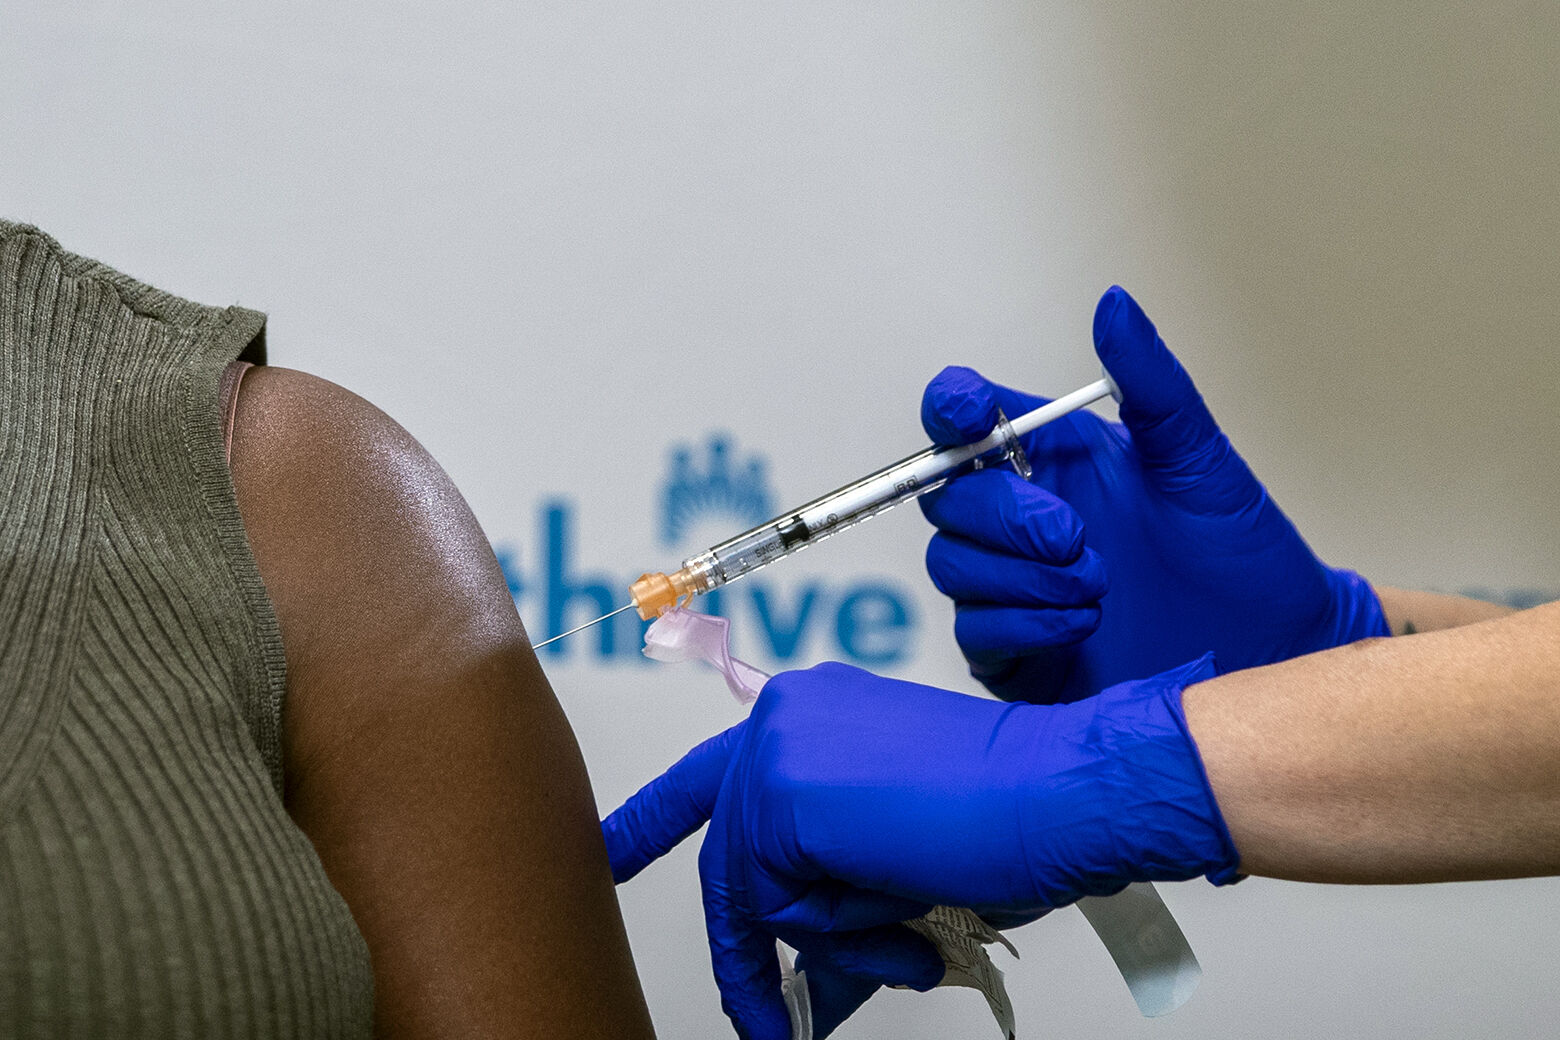 DC health director warns against COVID-19 vaccine scam